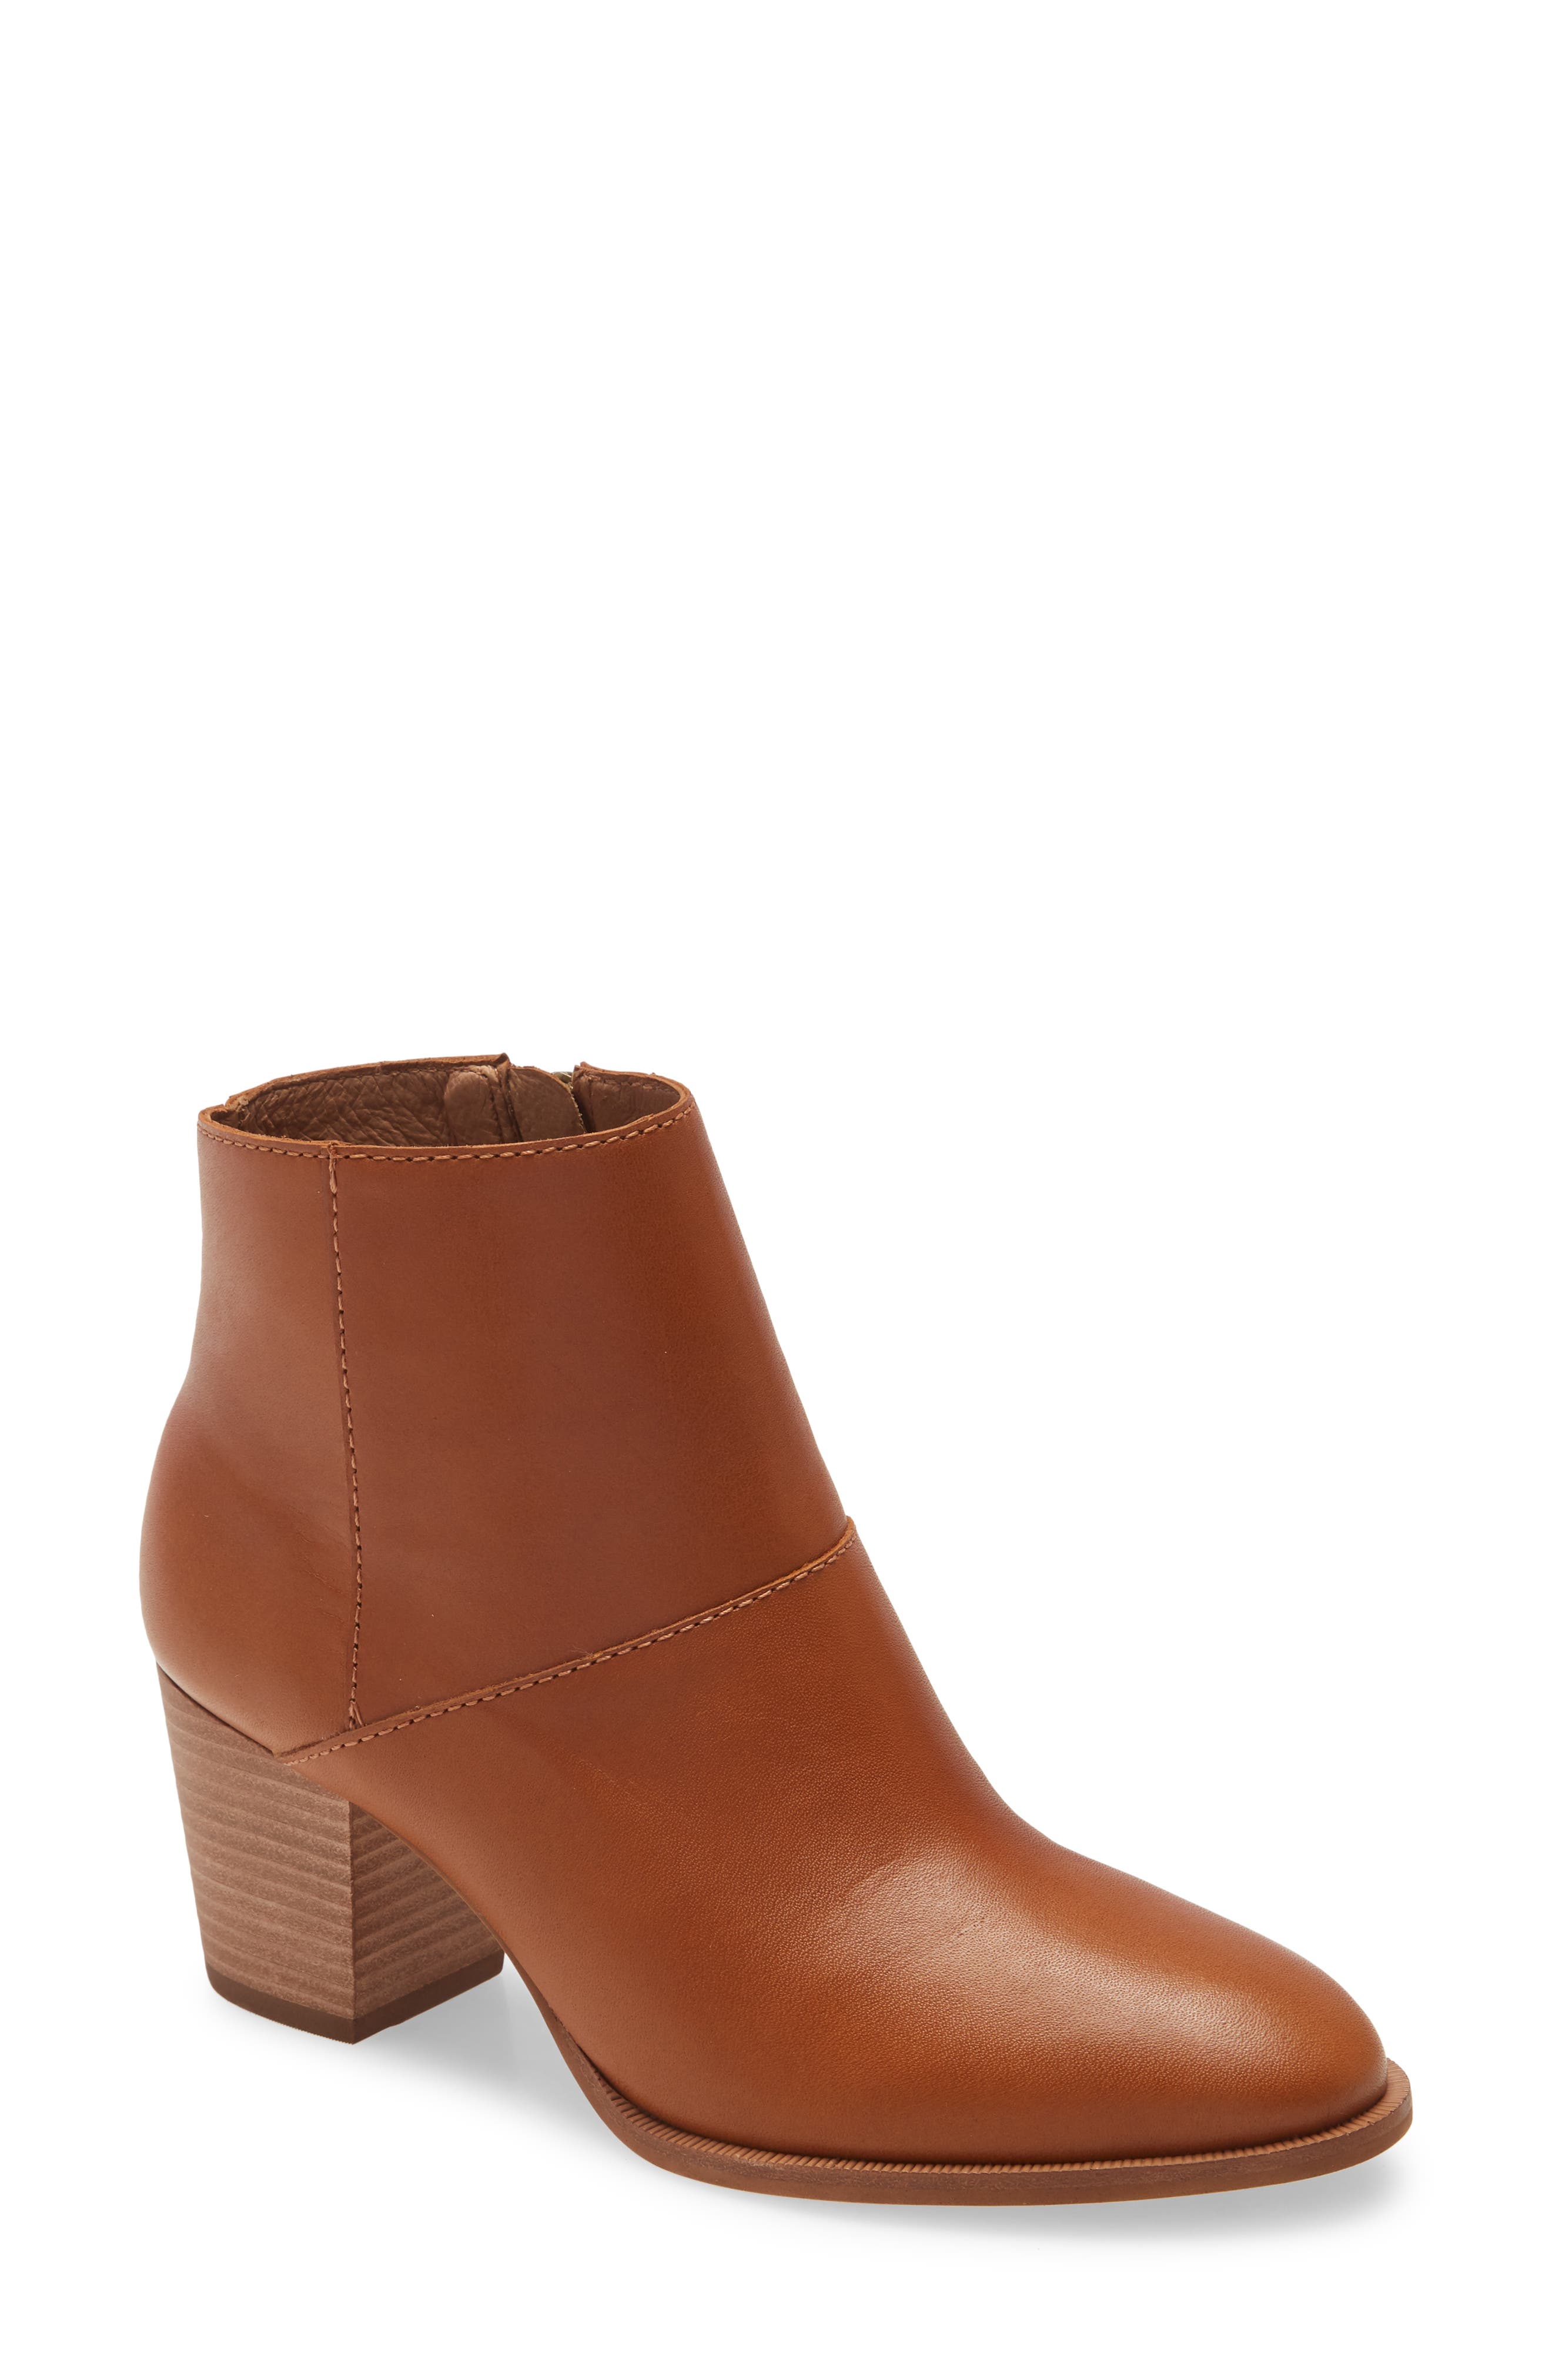 Madewell Booties \u0026 Ankle Boots | Nordstrom